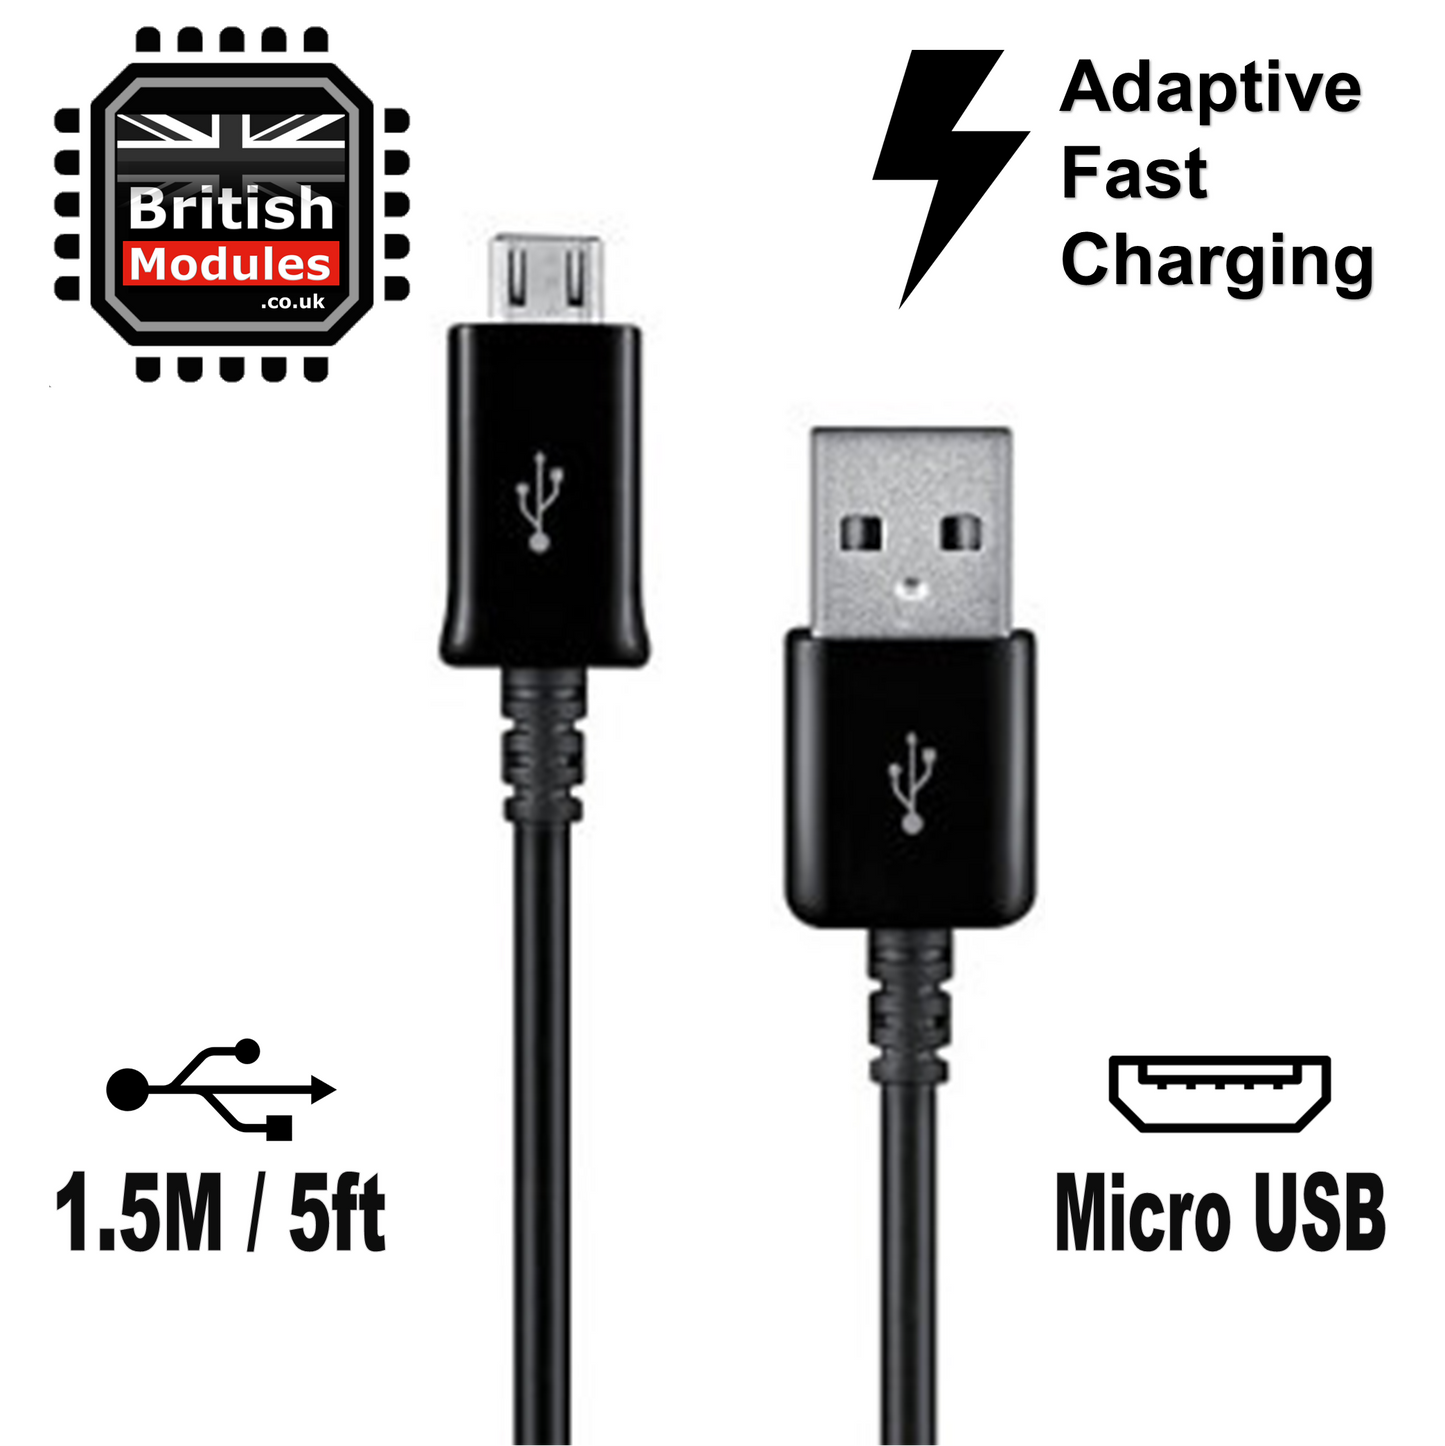 Samsung Universal Micro USB Charging Data Cable for Samsung Galaxy S7, S6, S5, S4, Note 4, Note 5 Black